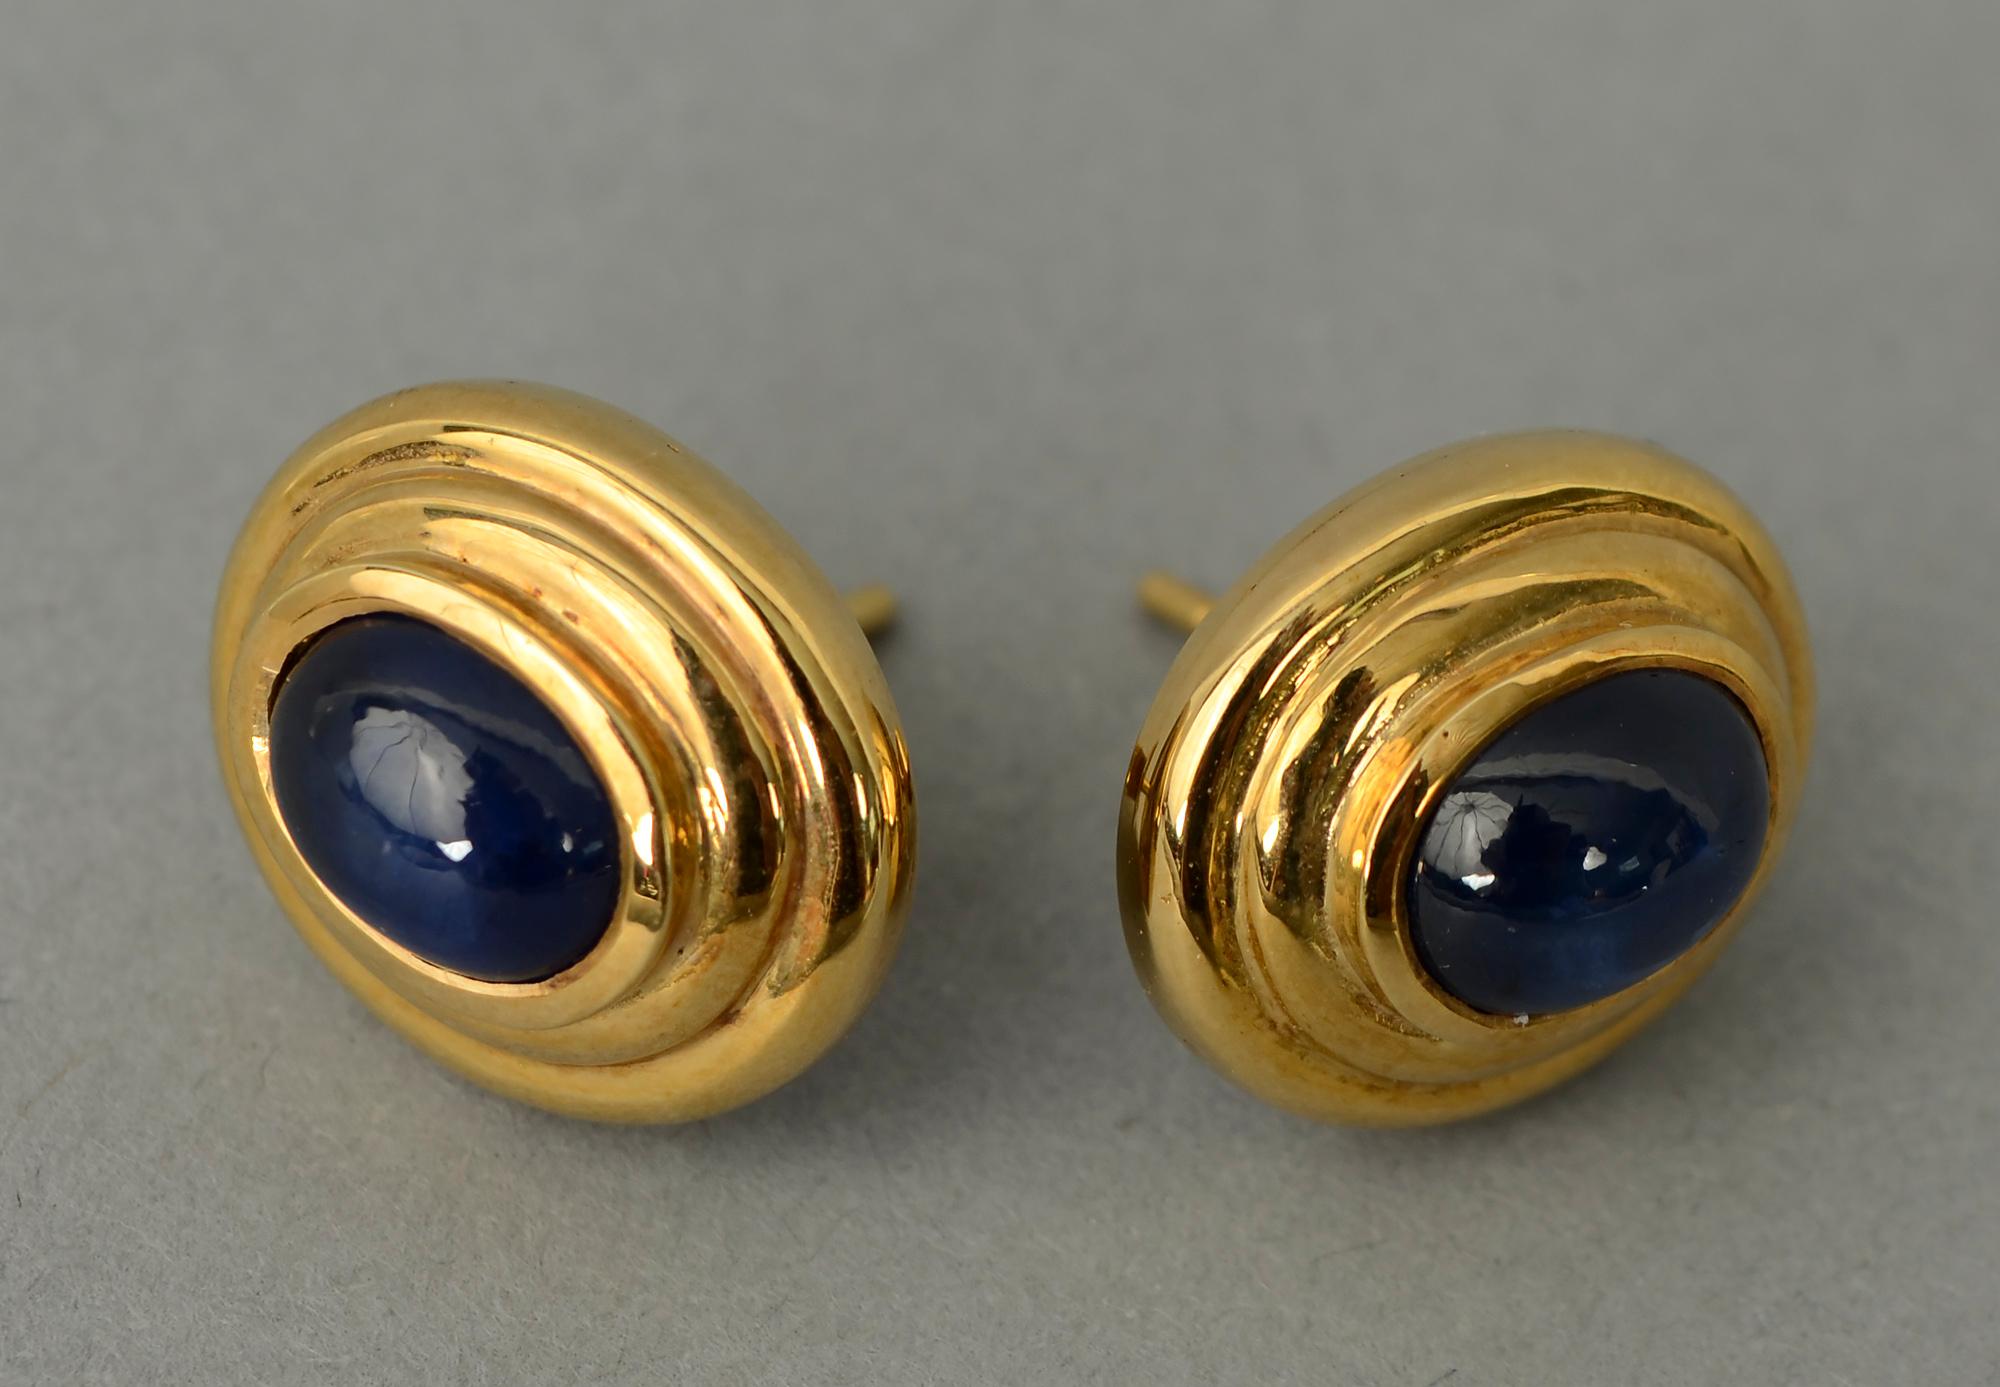 Delicate gold and sapphire earrings. Each earring has a cabochon sapphire that measures 1/4